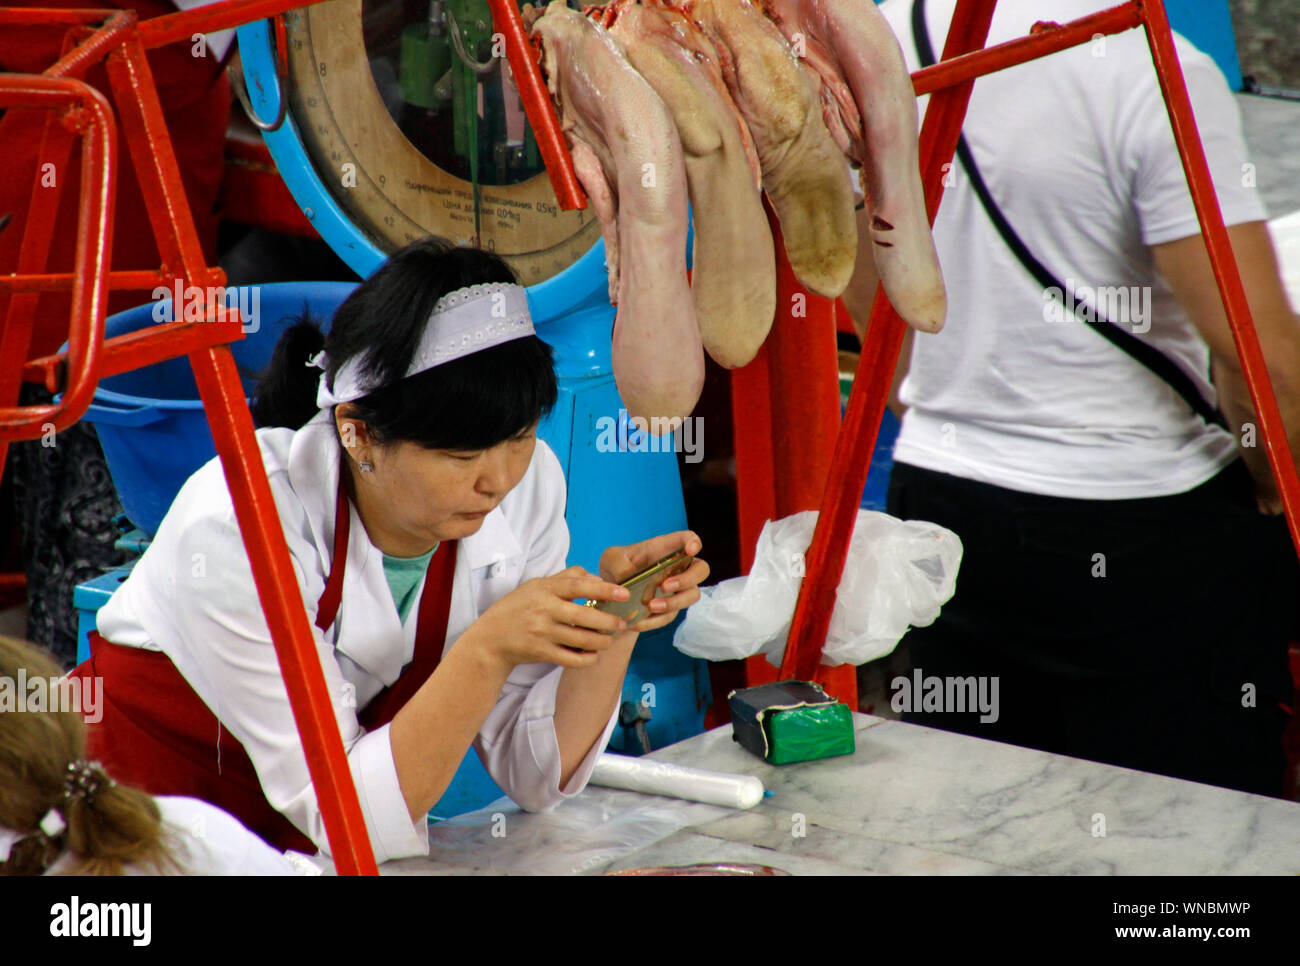 Almaty, Kazakhstan - August 22, 2019: Saleswoman under a row of cow tongues in the meat section of the famous Green Bazaar of Almaty, Kazakhstan. Stock Photo